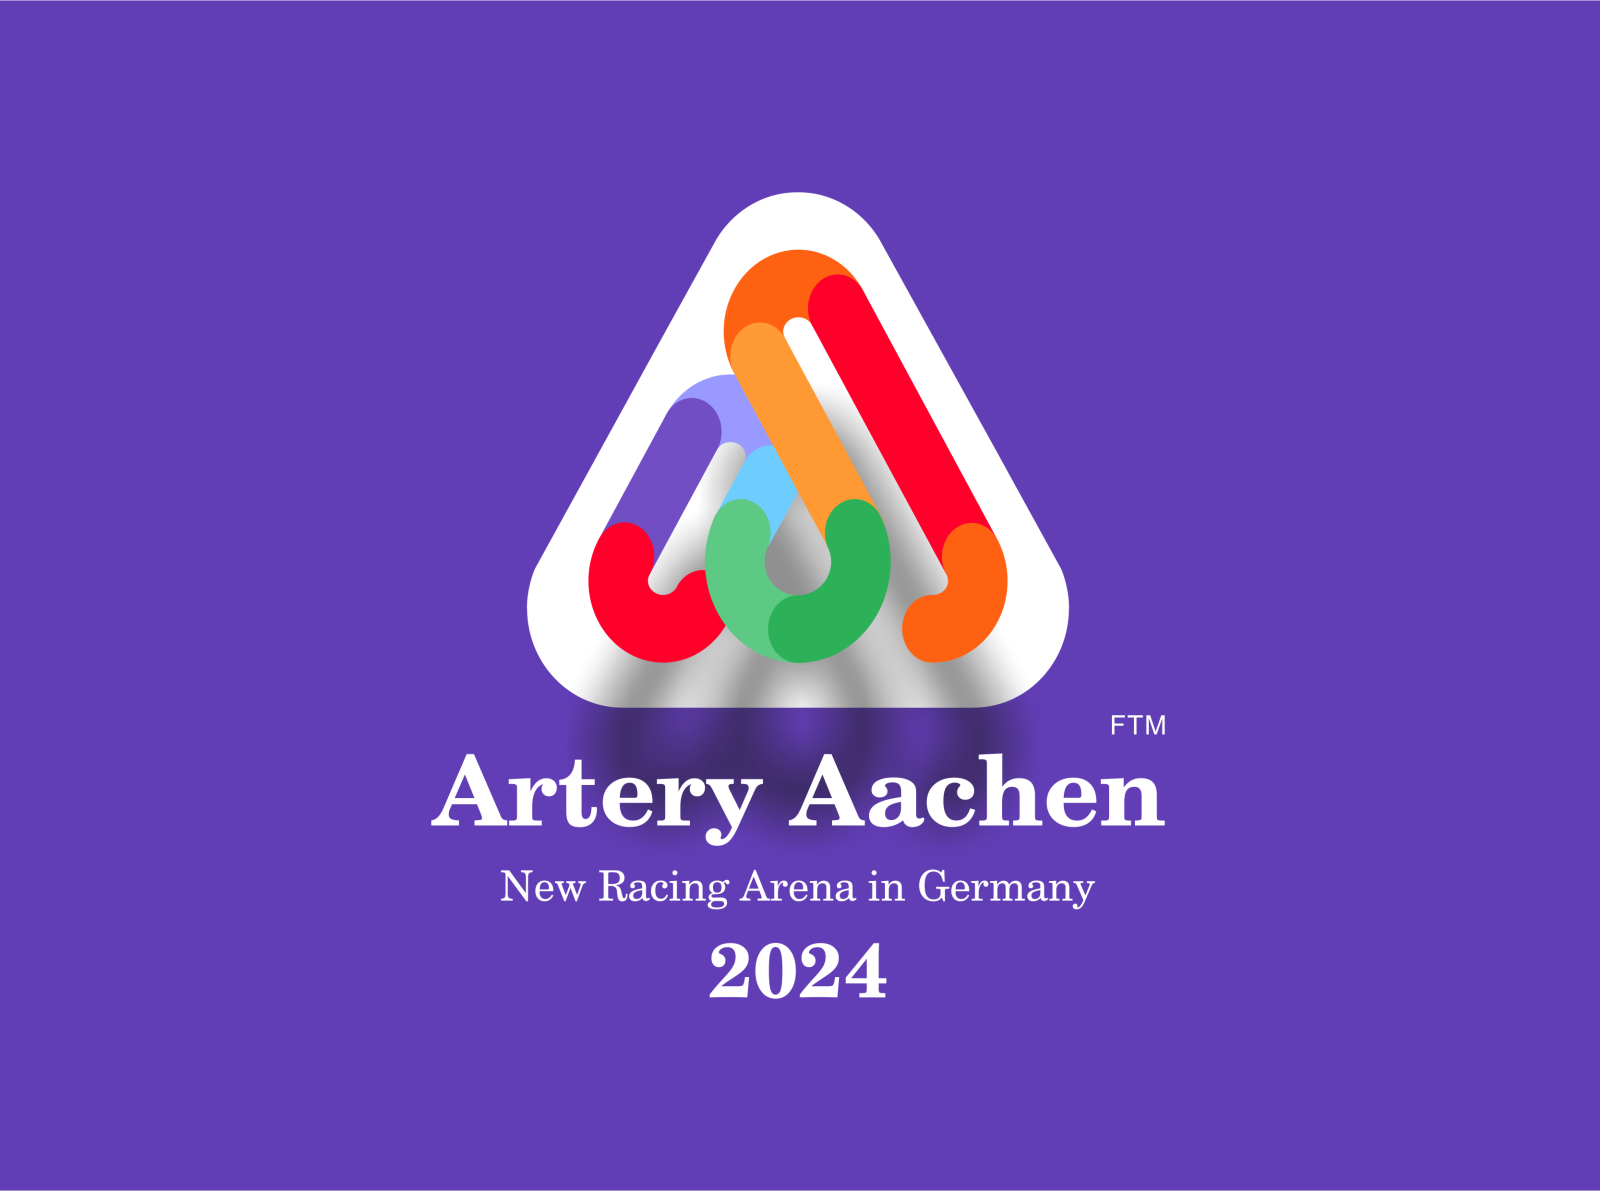 New Racing Arena in Germany 2024 by Anatoly Sbitnev on Dribbble